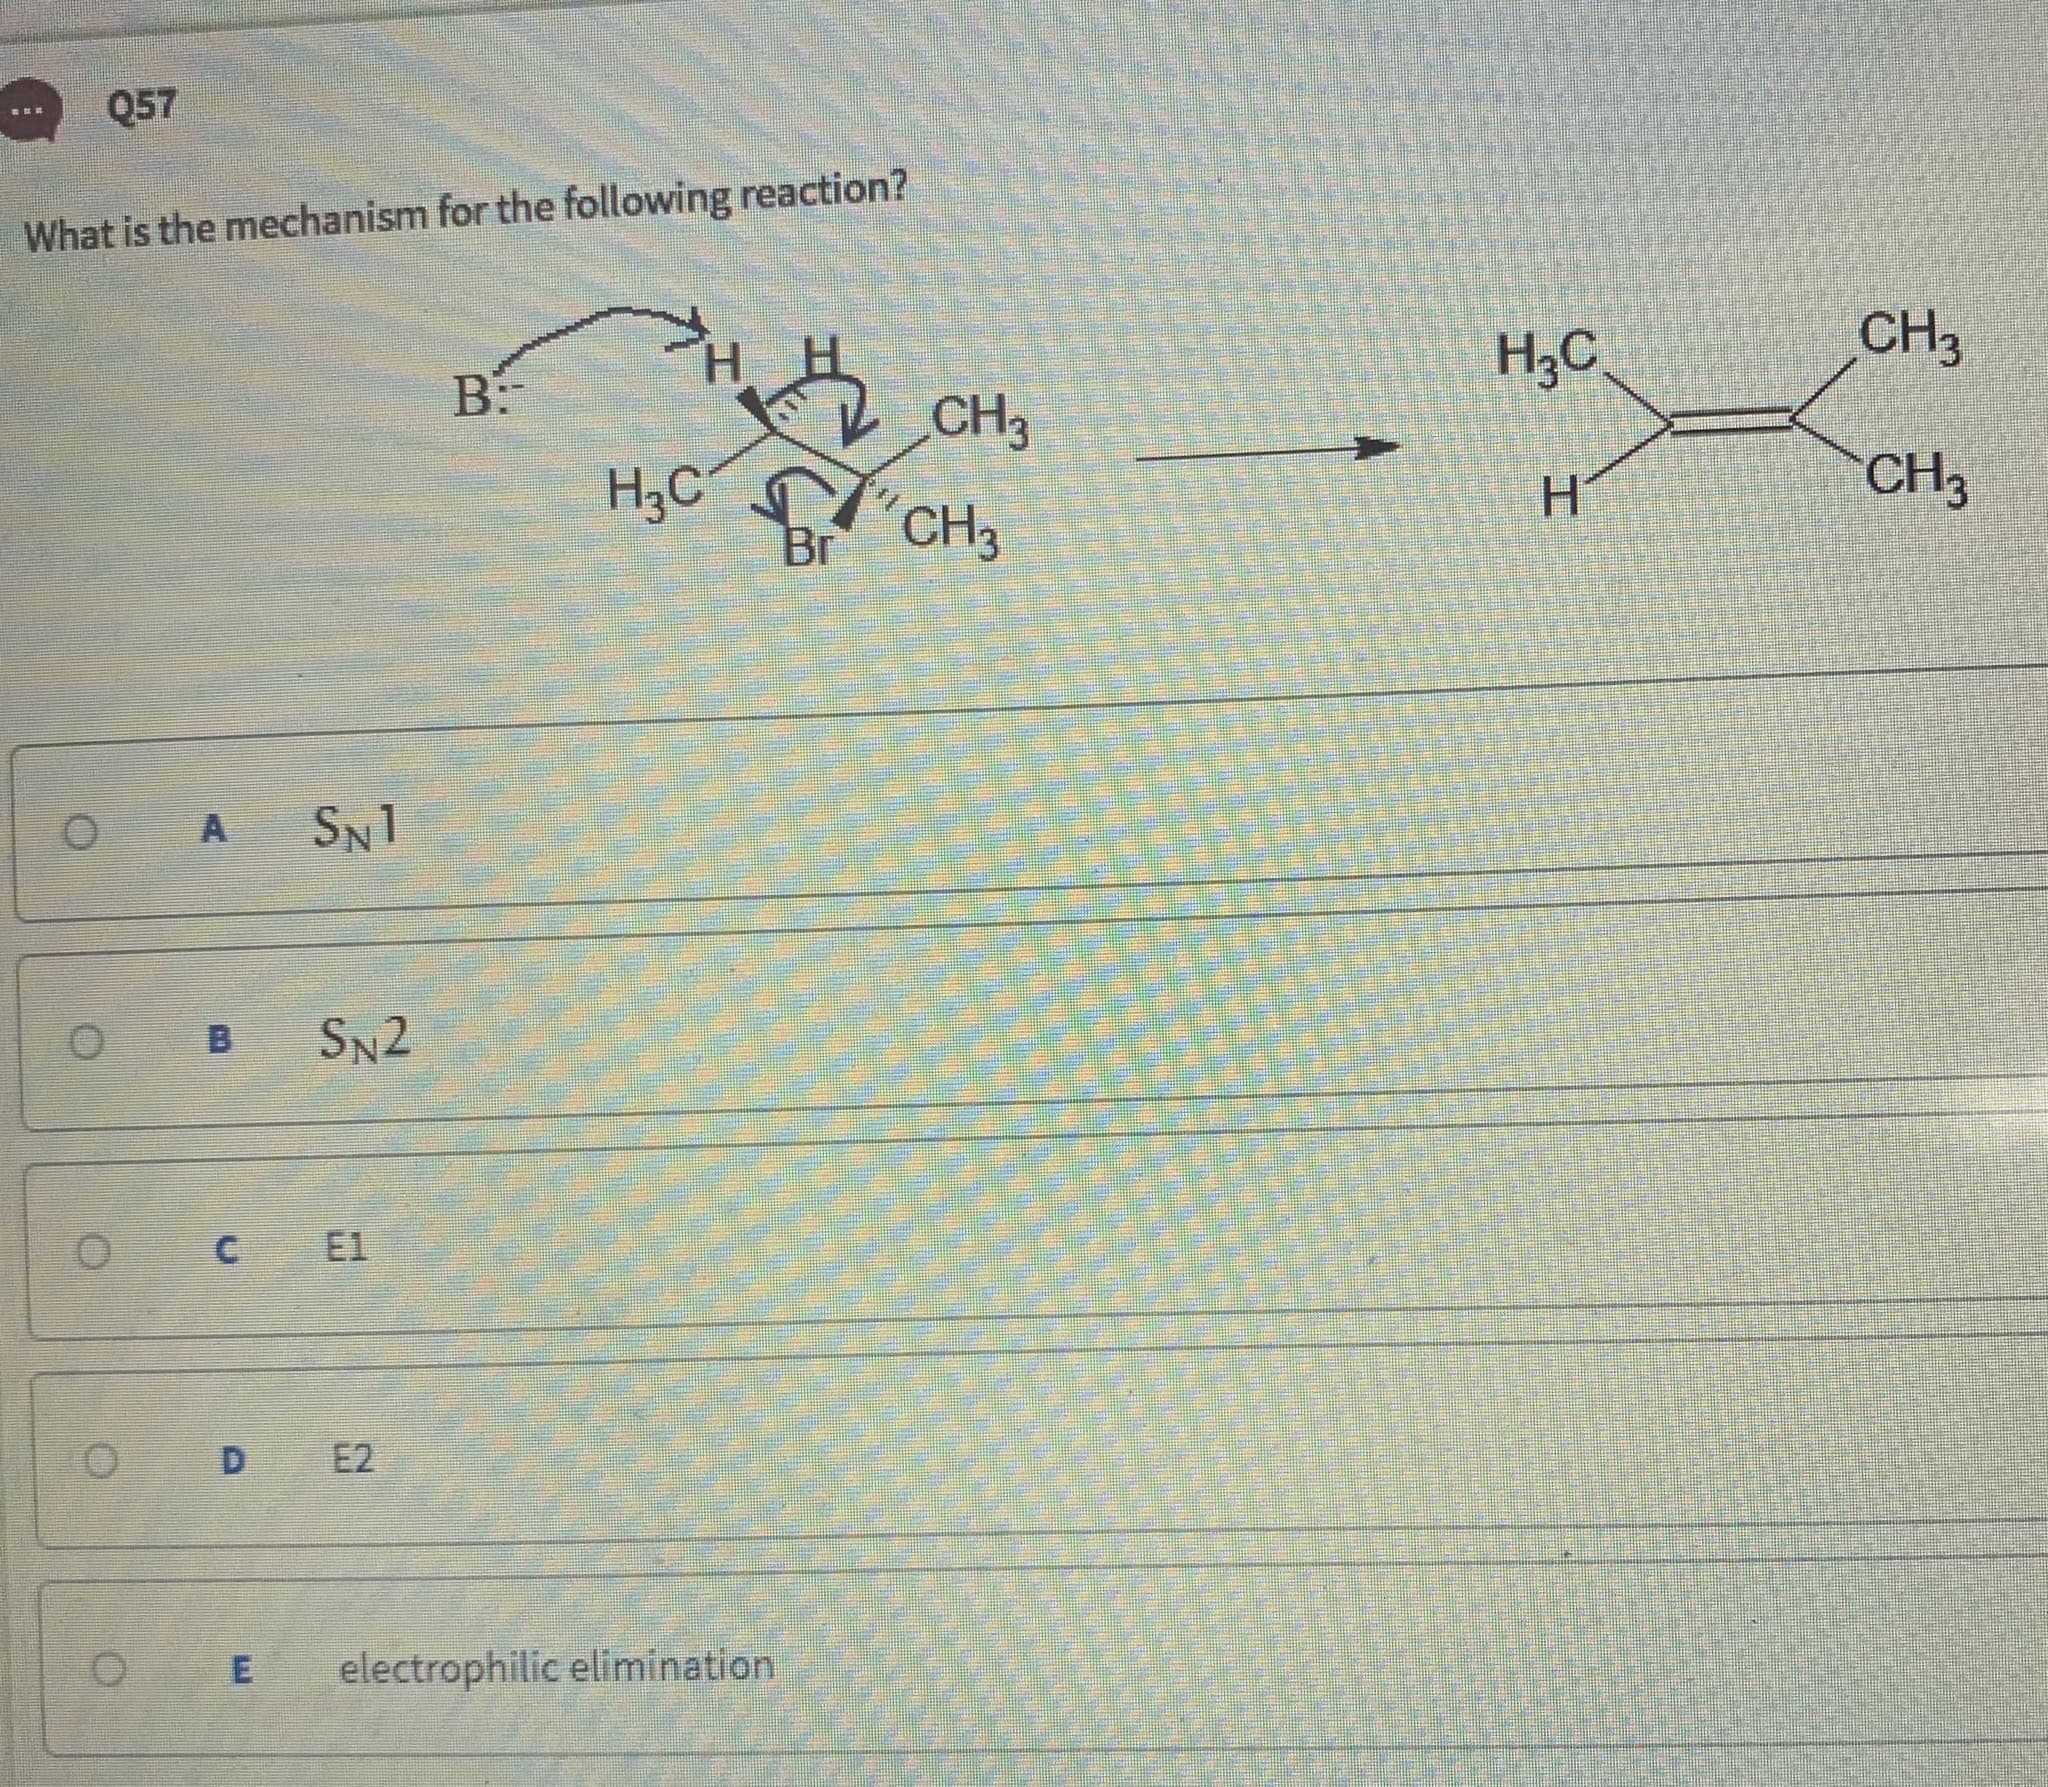 What is the mechanism for the following reaction?
